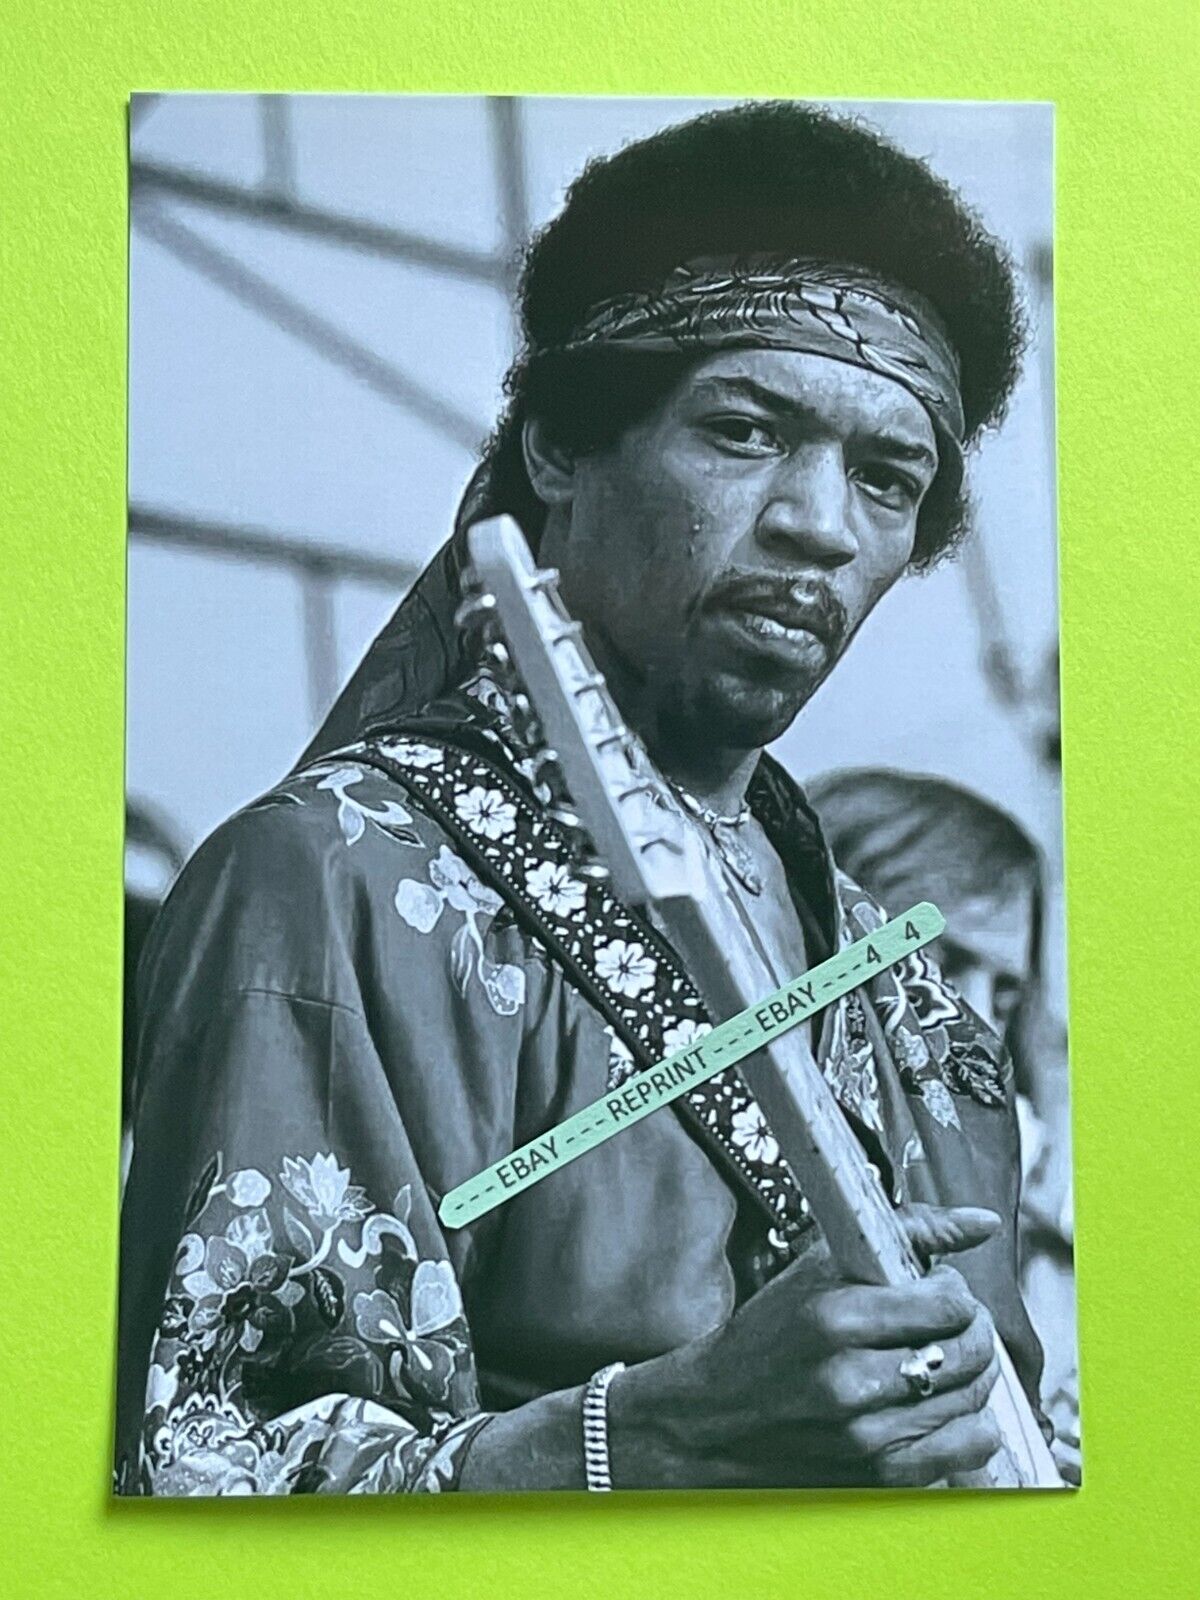 Found PHOTO of The JIMI HENDRIX Experience Old Guitar Legend from the 60\'s